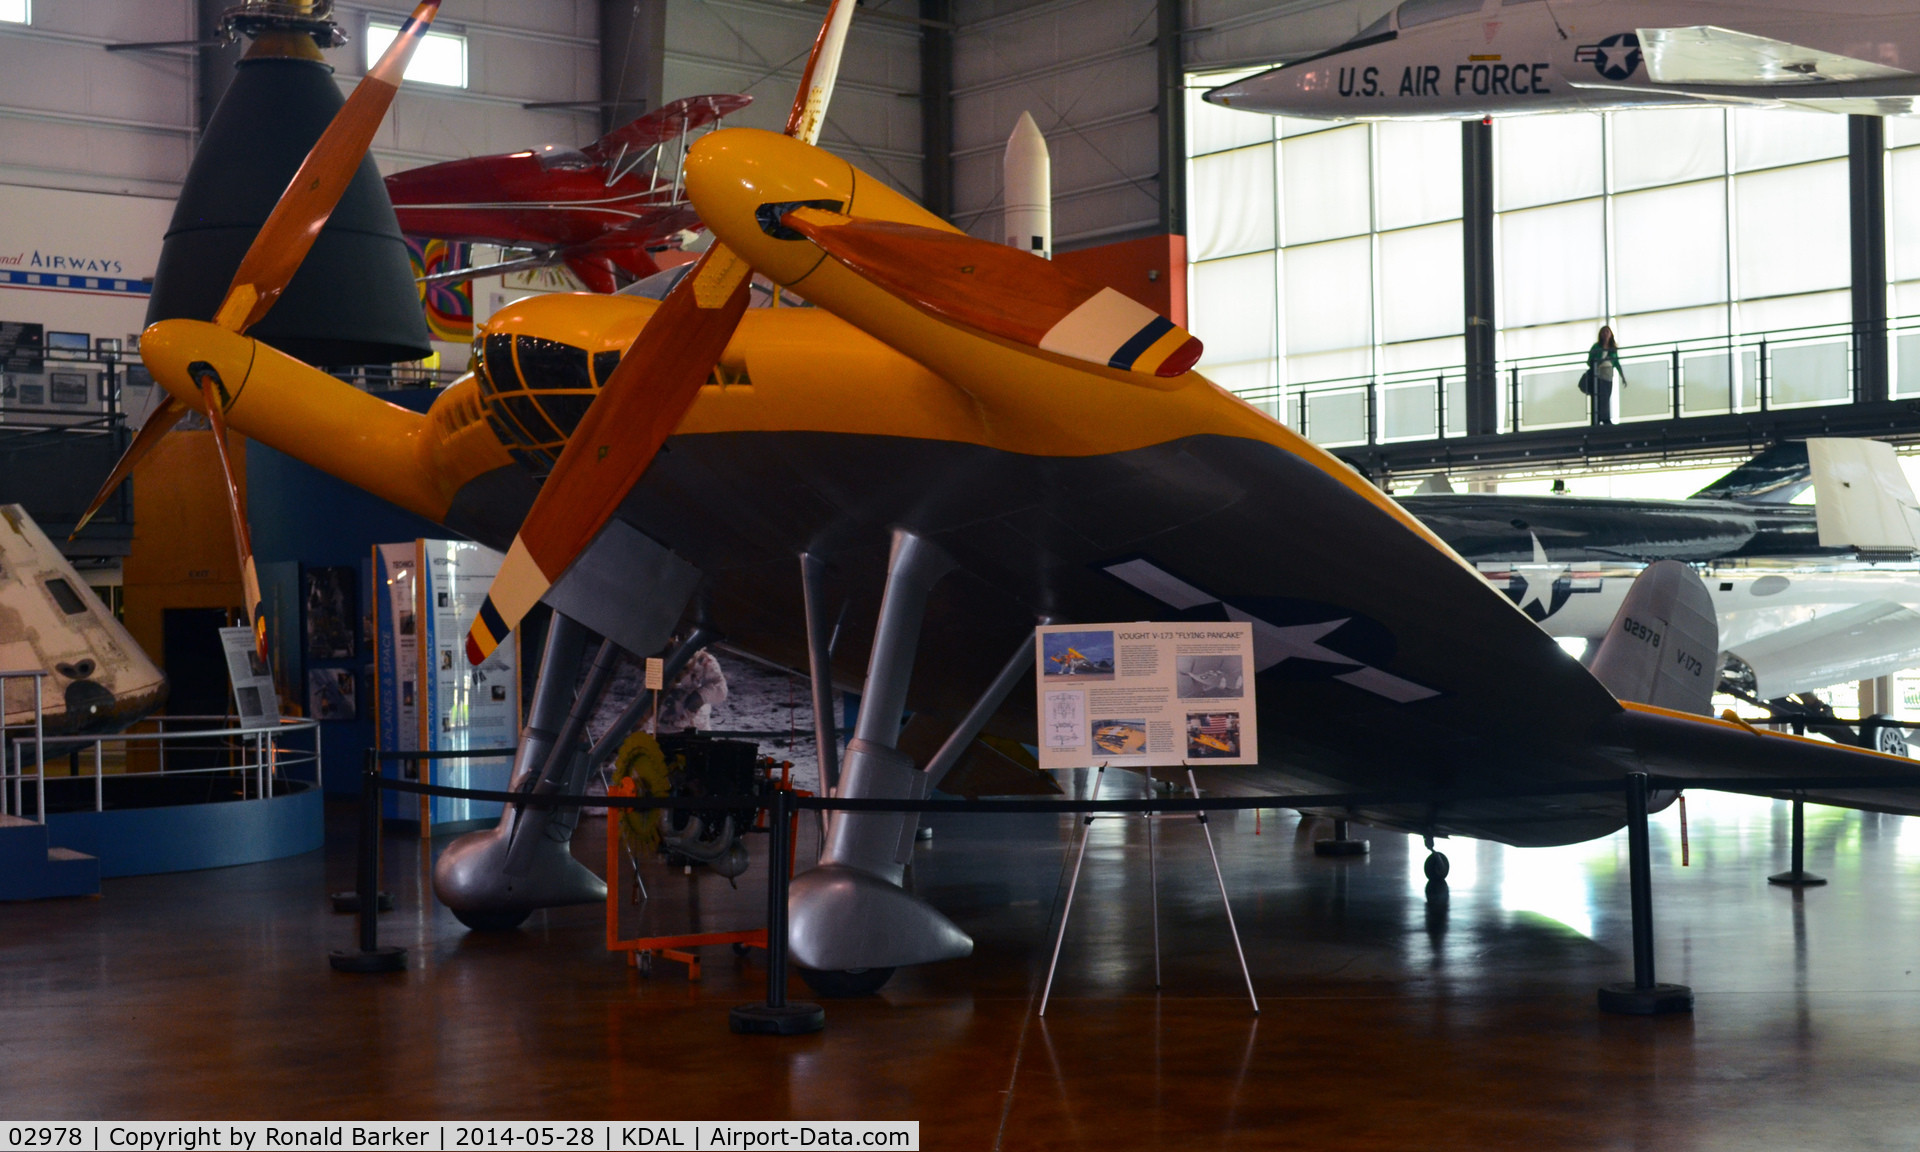 02978, 1942 Vought V-173 C/N 1, Frontiers of Flight Museum DAL